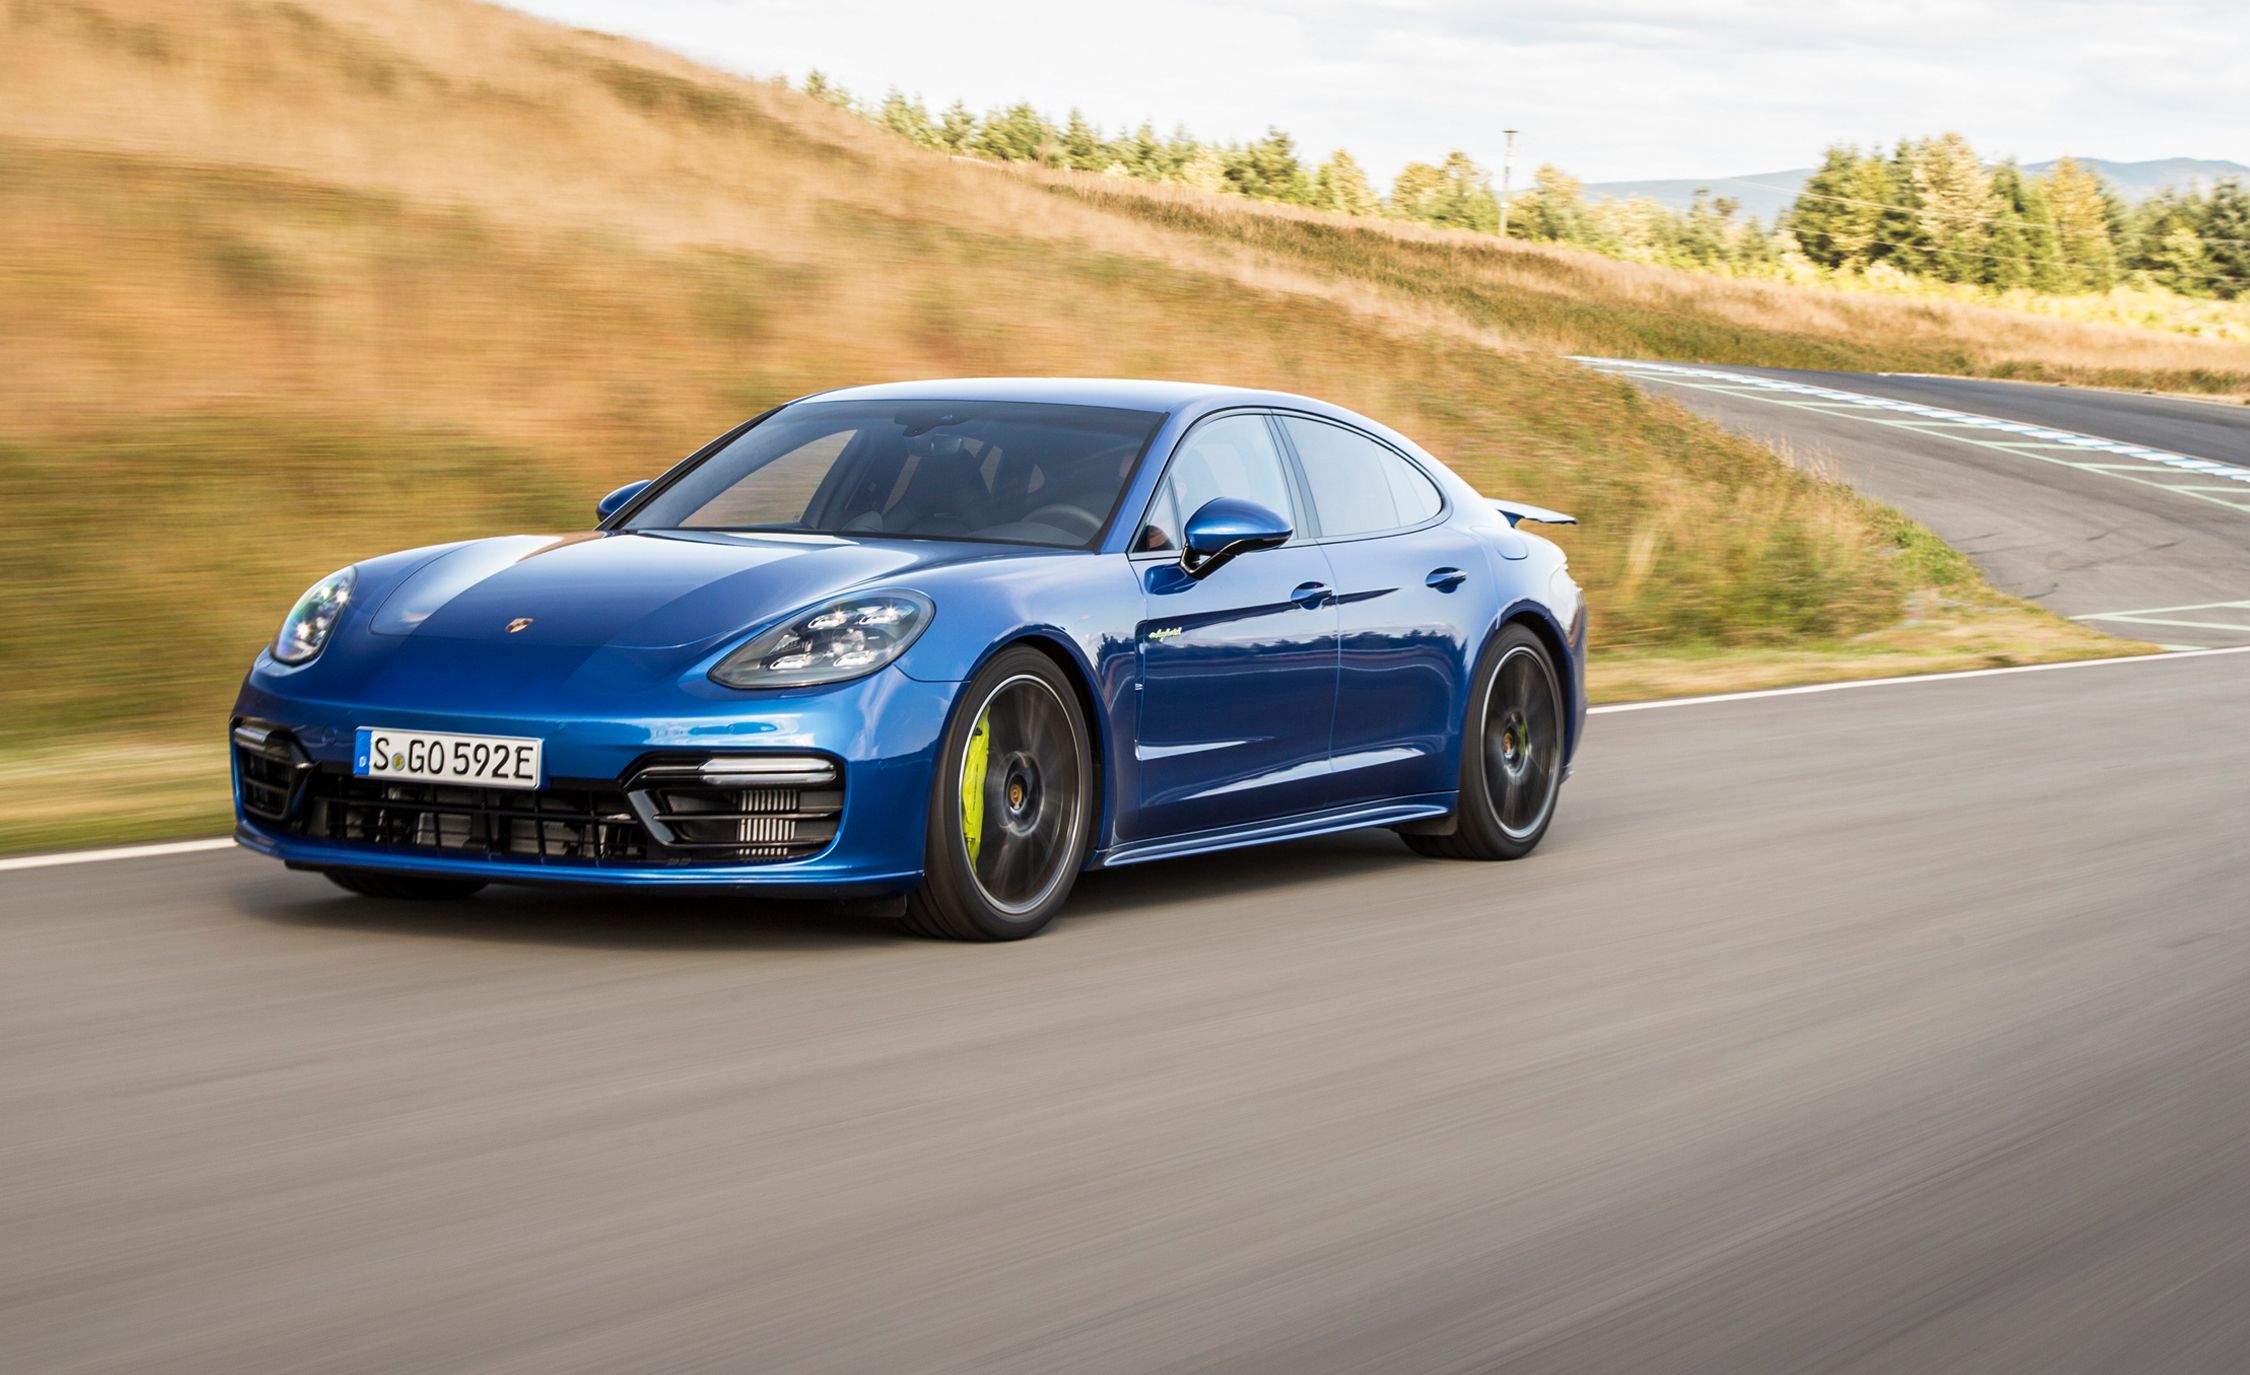 2018 Porsche Panamera Turbo S E-Hybrid First Drive | Review | Car and Driver